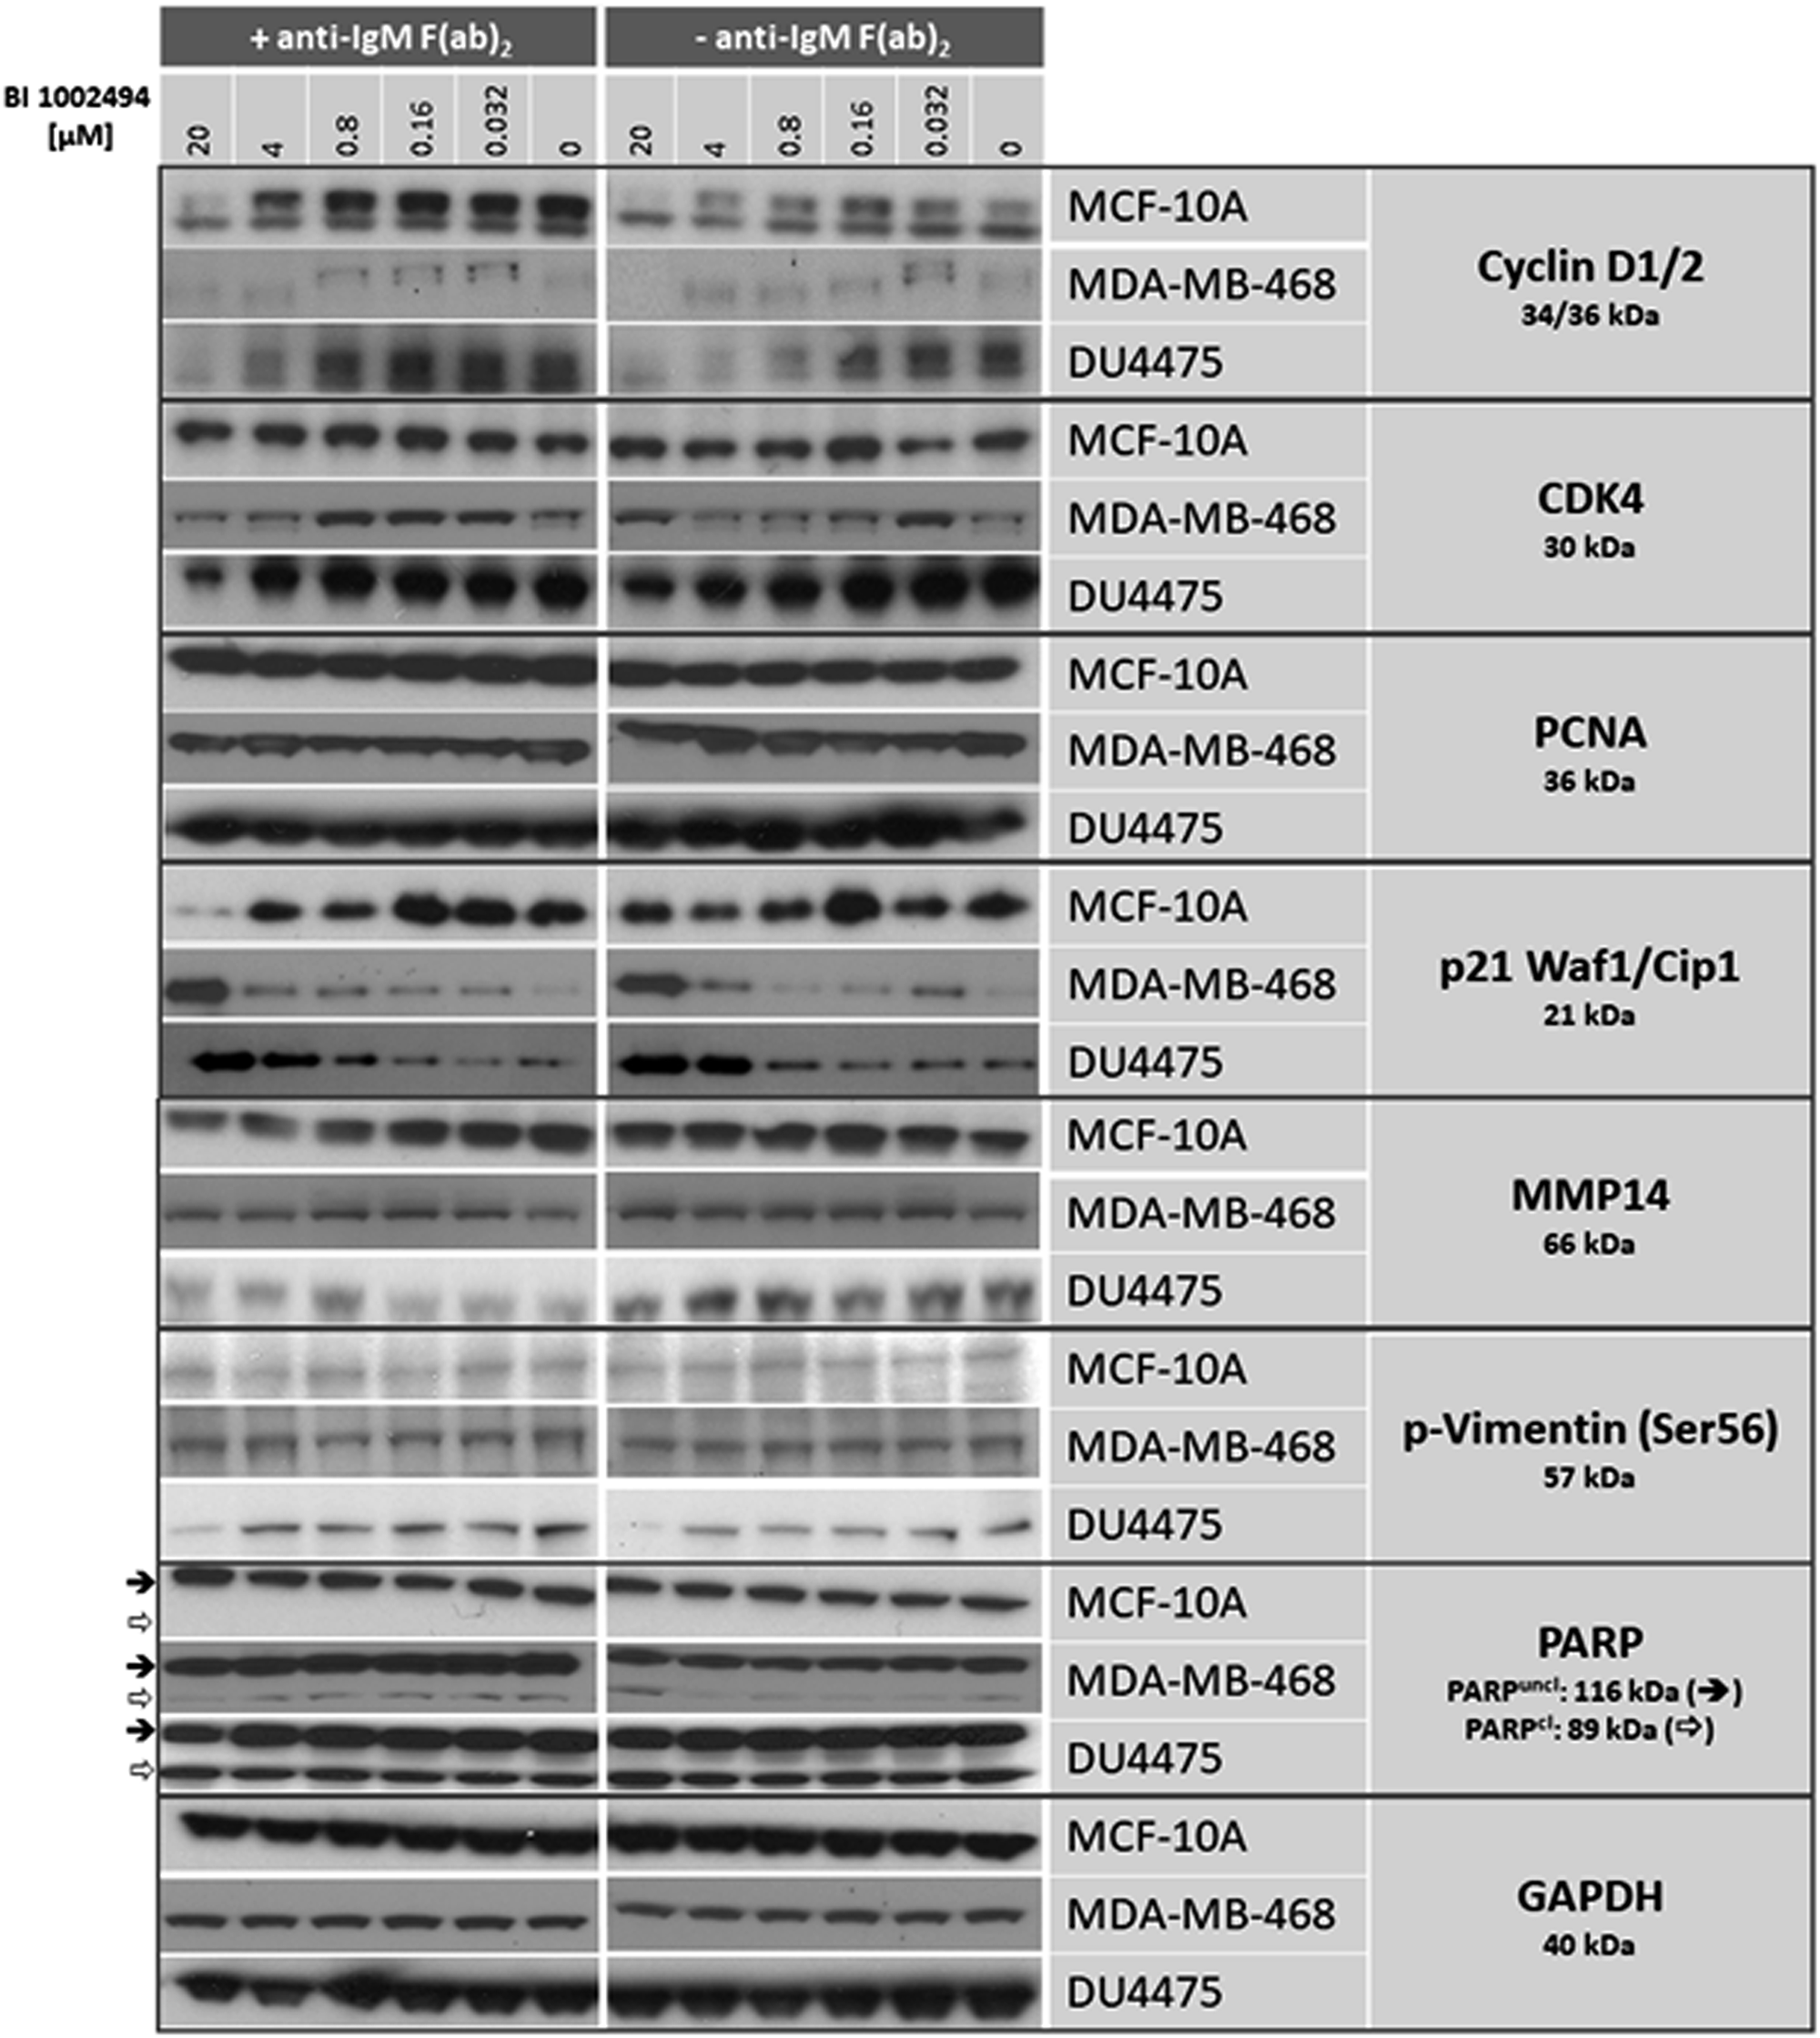 Western blot: effect of 16-hour incubation of BI 1002494 (0, 0.032, 0.16, 0.8, 4 and 20 μM) on selected proliferative (cyclin D1/2, CDK4, PCNA, p21 Waf1/Cip1) and EMT/invadopodia (MMP14, PARP, phospho-vimentin Ser56) marker proteins in a non-tumorigenic, spontaneously immortalized human breast epithelial cell line MCF-10A and in two breast cancer cell lines MDA-MB-468 and DU4475.